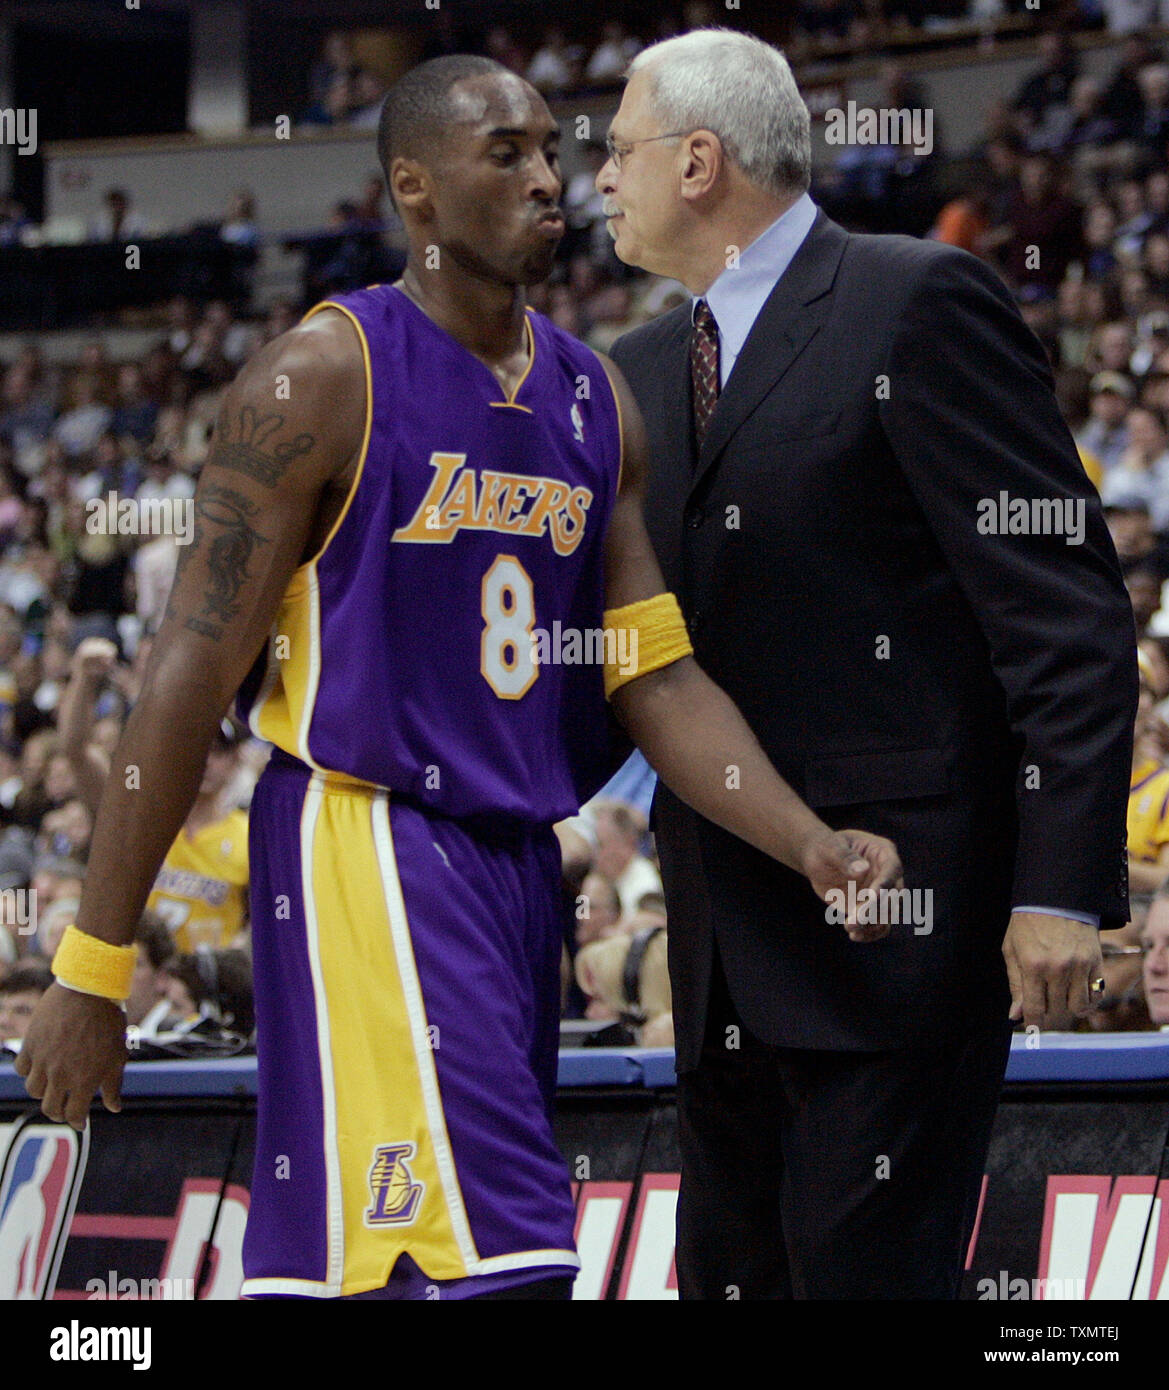 Los Angeles Lakers Kobe Bryant (L) walks past head Phil Jackson (R) after receiving his fourth foul late in the second quarter against the Denver Nuggets at the Pepsi Center in Denver November 2, 2005.  Jackson made his debut with Bryant and the Lakers to begin the 2005-06 NBA season in Denver.   (UPI Photo/Gary C. Caskey) Stock Photo